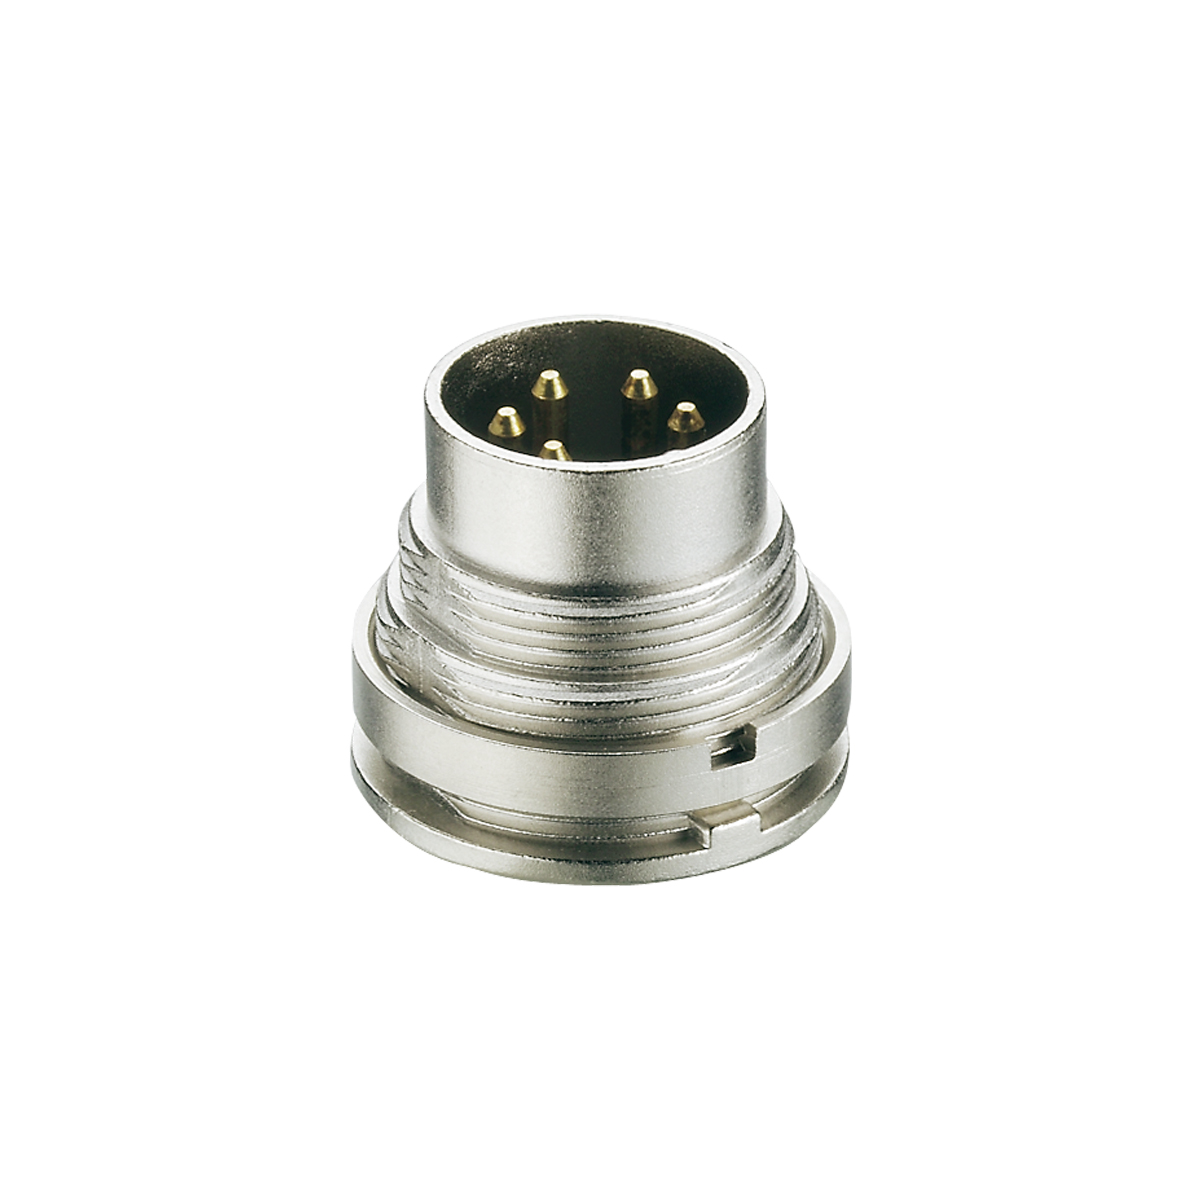 Lumberg: SGV (Series 03 | Circular connectors with threaded joint M16 acc. to IEC 61076-2-106, IP40/IP68)